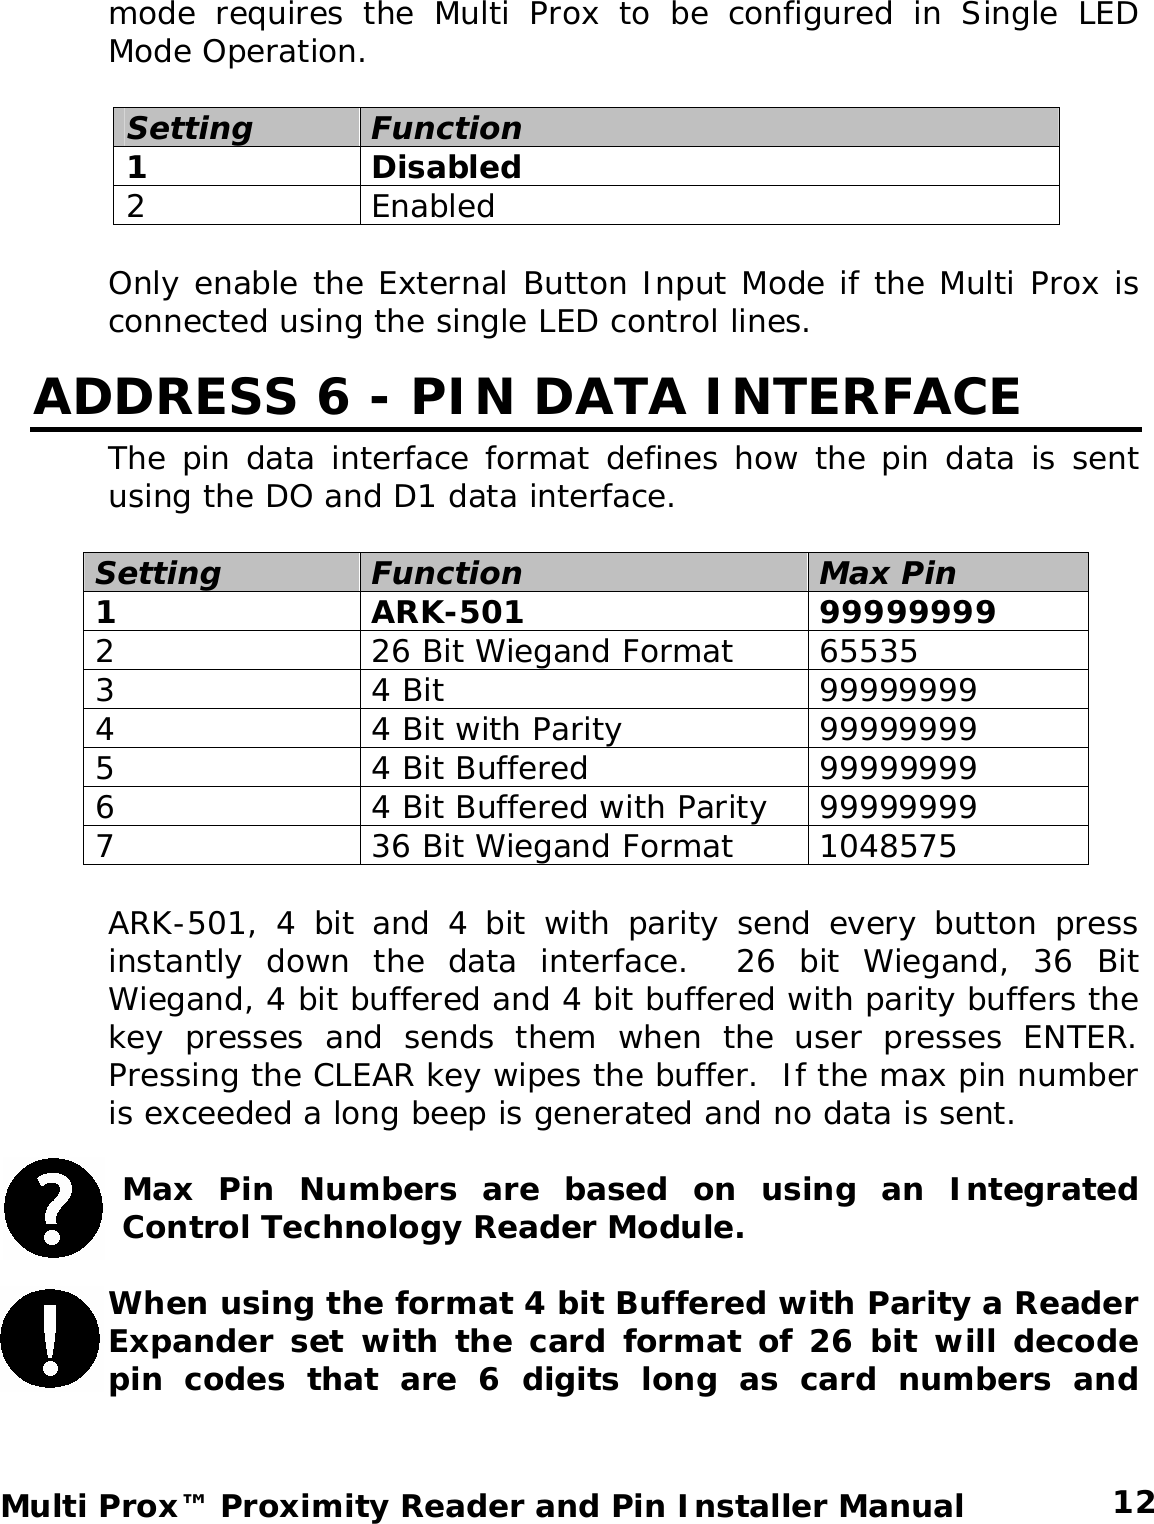 mode requires the Multi Prox to be configured in Single LED Mode Operation.  Setting Function 1 Disabled 2 Enabled  Only enable the External Button Input Mode if the Multi Prox is connected using the single LED control lines. ADDRESS 6 - PIN DATA INTERFACE The pin data interface format defines how the pin data is sent using the DO and D1 data interface.  Setting Function  Max Pin  1 ARK-501  99999999 2  26 Bit Wiegand Format  65535 3 4 Bit  99999999 4  4 Bit with Parity 99999999 5  4 Bit Buffered  99999999 6  4 Bit Buffered with Parity  99999999 7  36 Bit Wiegand Format  1048575  ARK-501, 4 bit and 4 bit with parity send every button press instantly down the data interface.  26 bit Wiegand, 36 Bit Wiegand, 4 bit buffered and 4 bit buffered with parity buffers the key presses and sends them when the user presses ENTER.  Pressing the CLEAR key wipes the buffer.  If the max pin number is exceeded a long beep is generated and no data is sent.    Max Pin Numbers are based on using an Integrated Control Technology Reader Module.  When using the format 4 bit Buffered with Parity a Reader Expander set with the card format of 26 bit will decode pin codes that are 6 digits long as card numbers and  12 Multi Prox™ Proximity Reader and Pin Installer Manual 